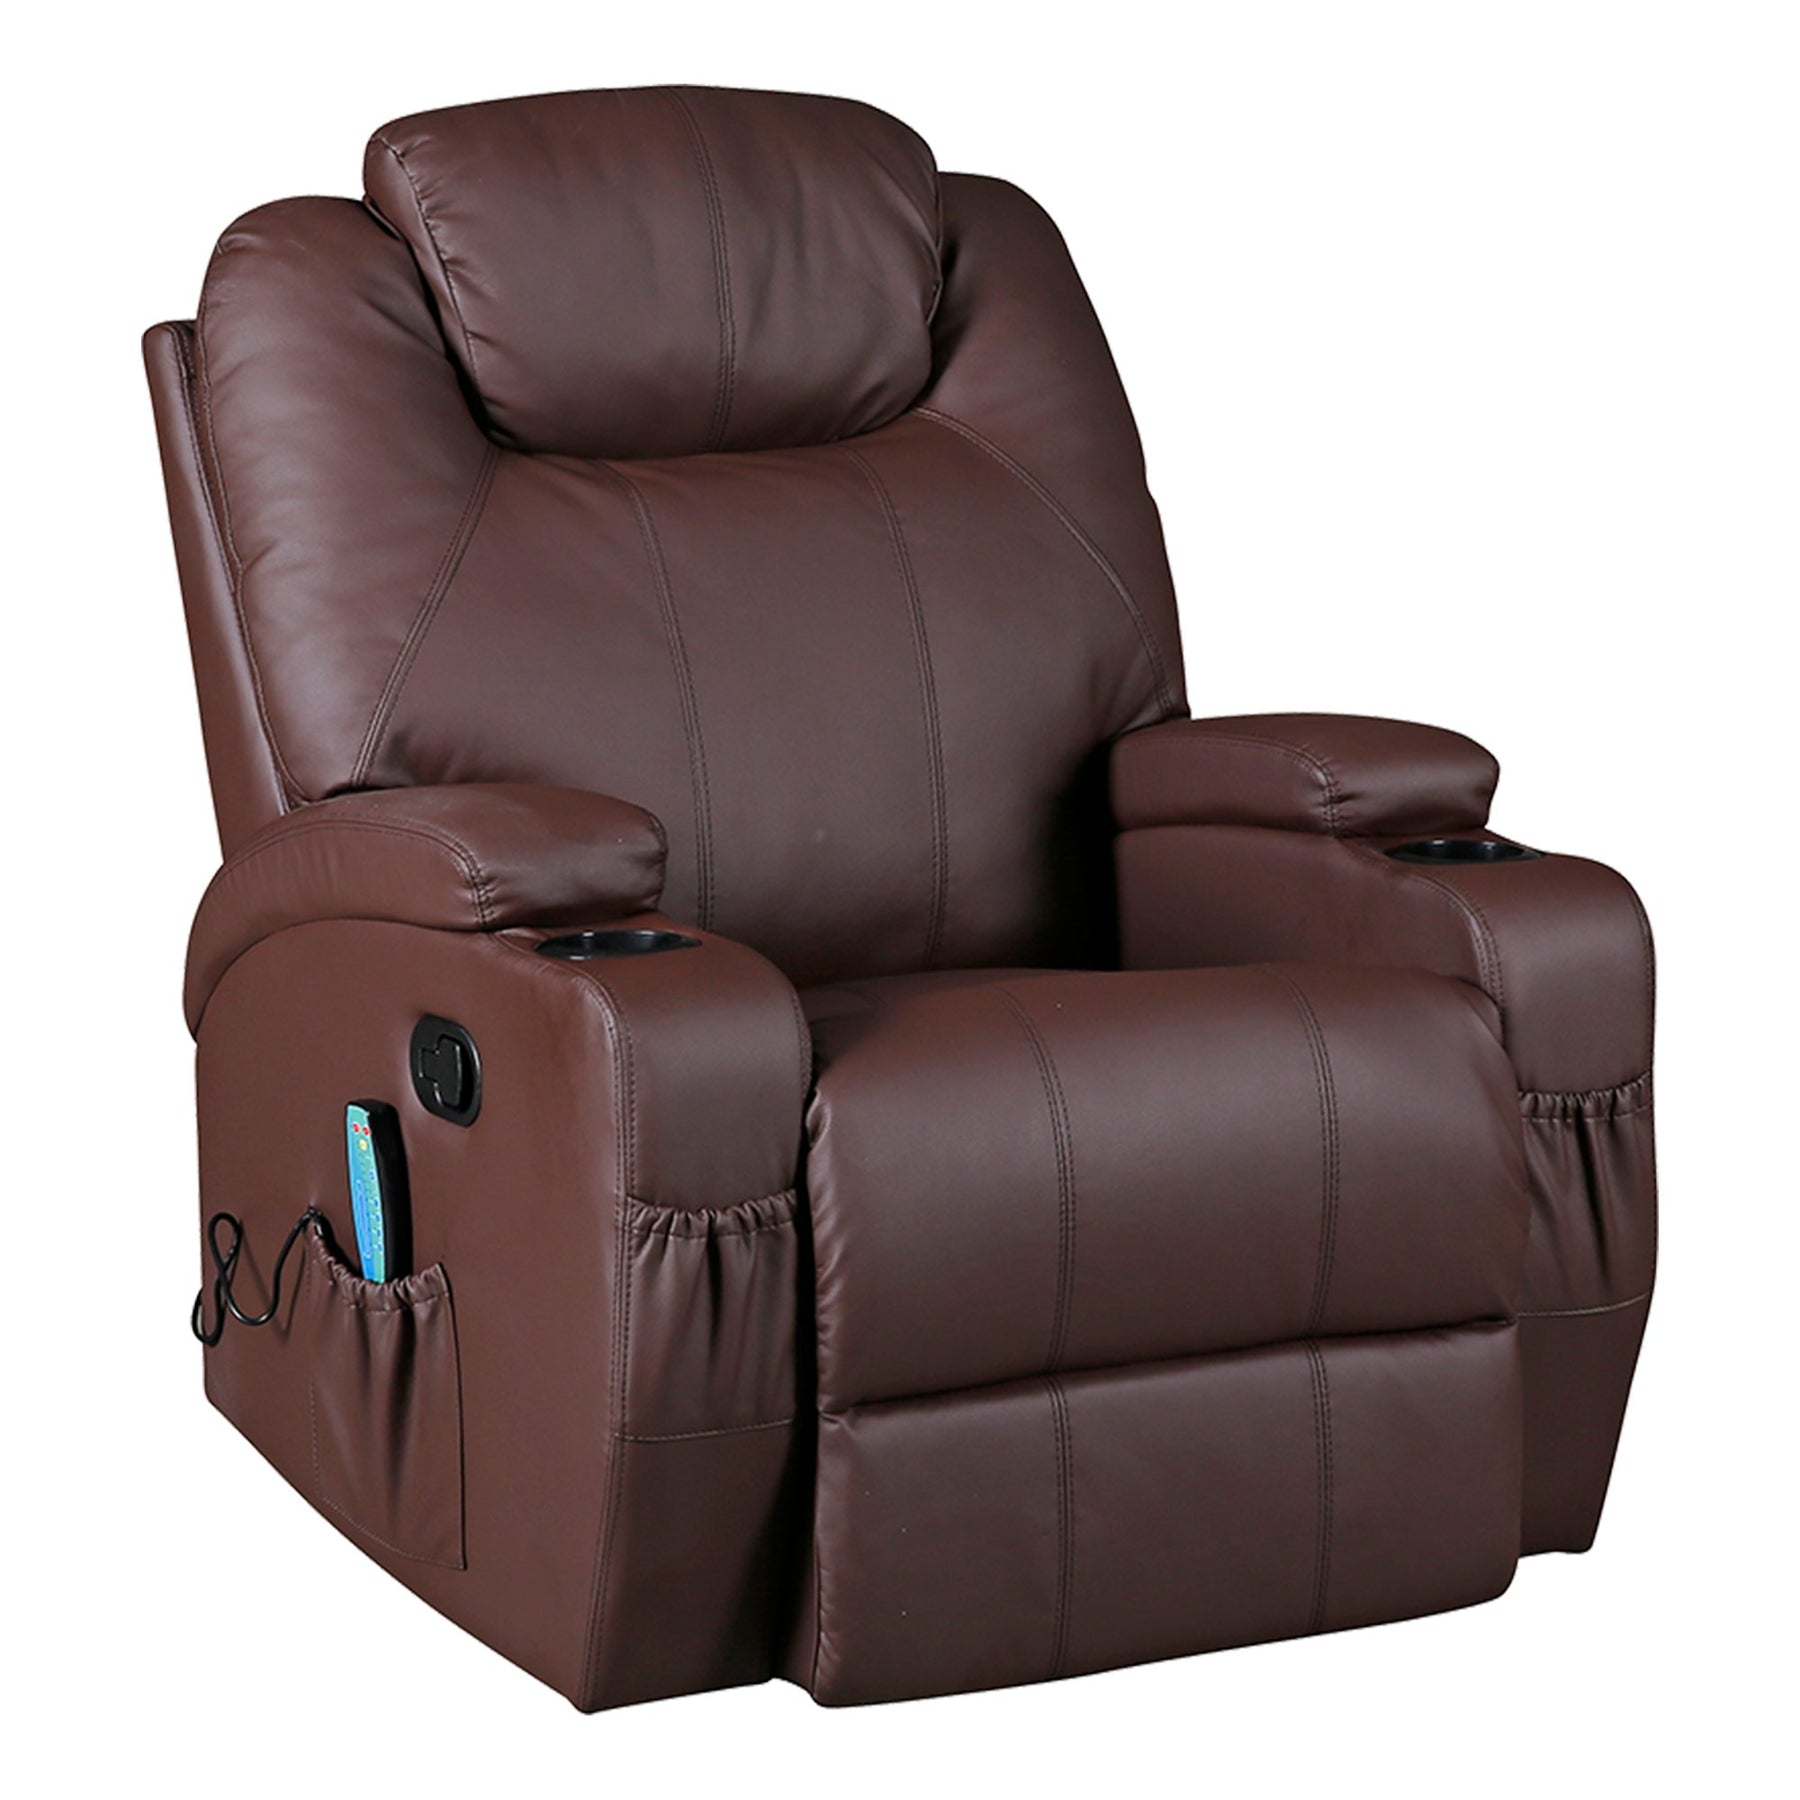 Health & Beauty > Massage - Brown Massage Sofa Chair Recliner 360 Degree Swivel PU Leather Lounge 8 Point Heated